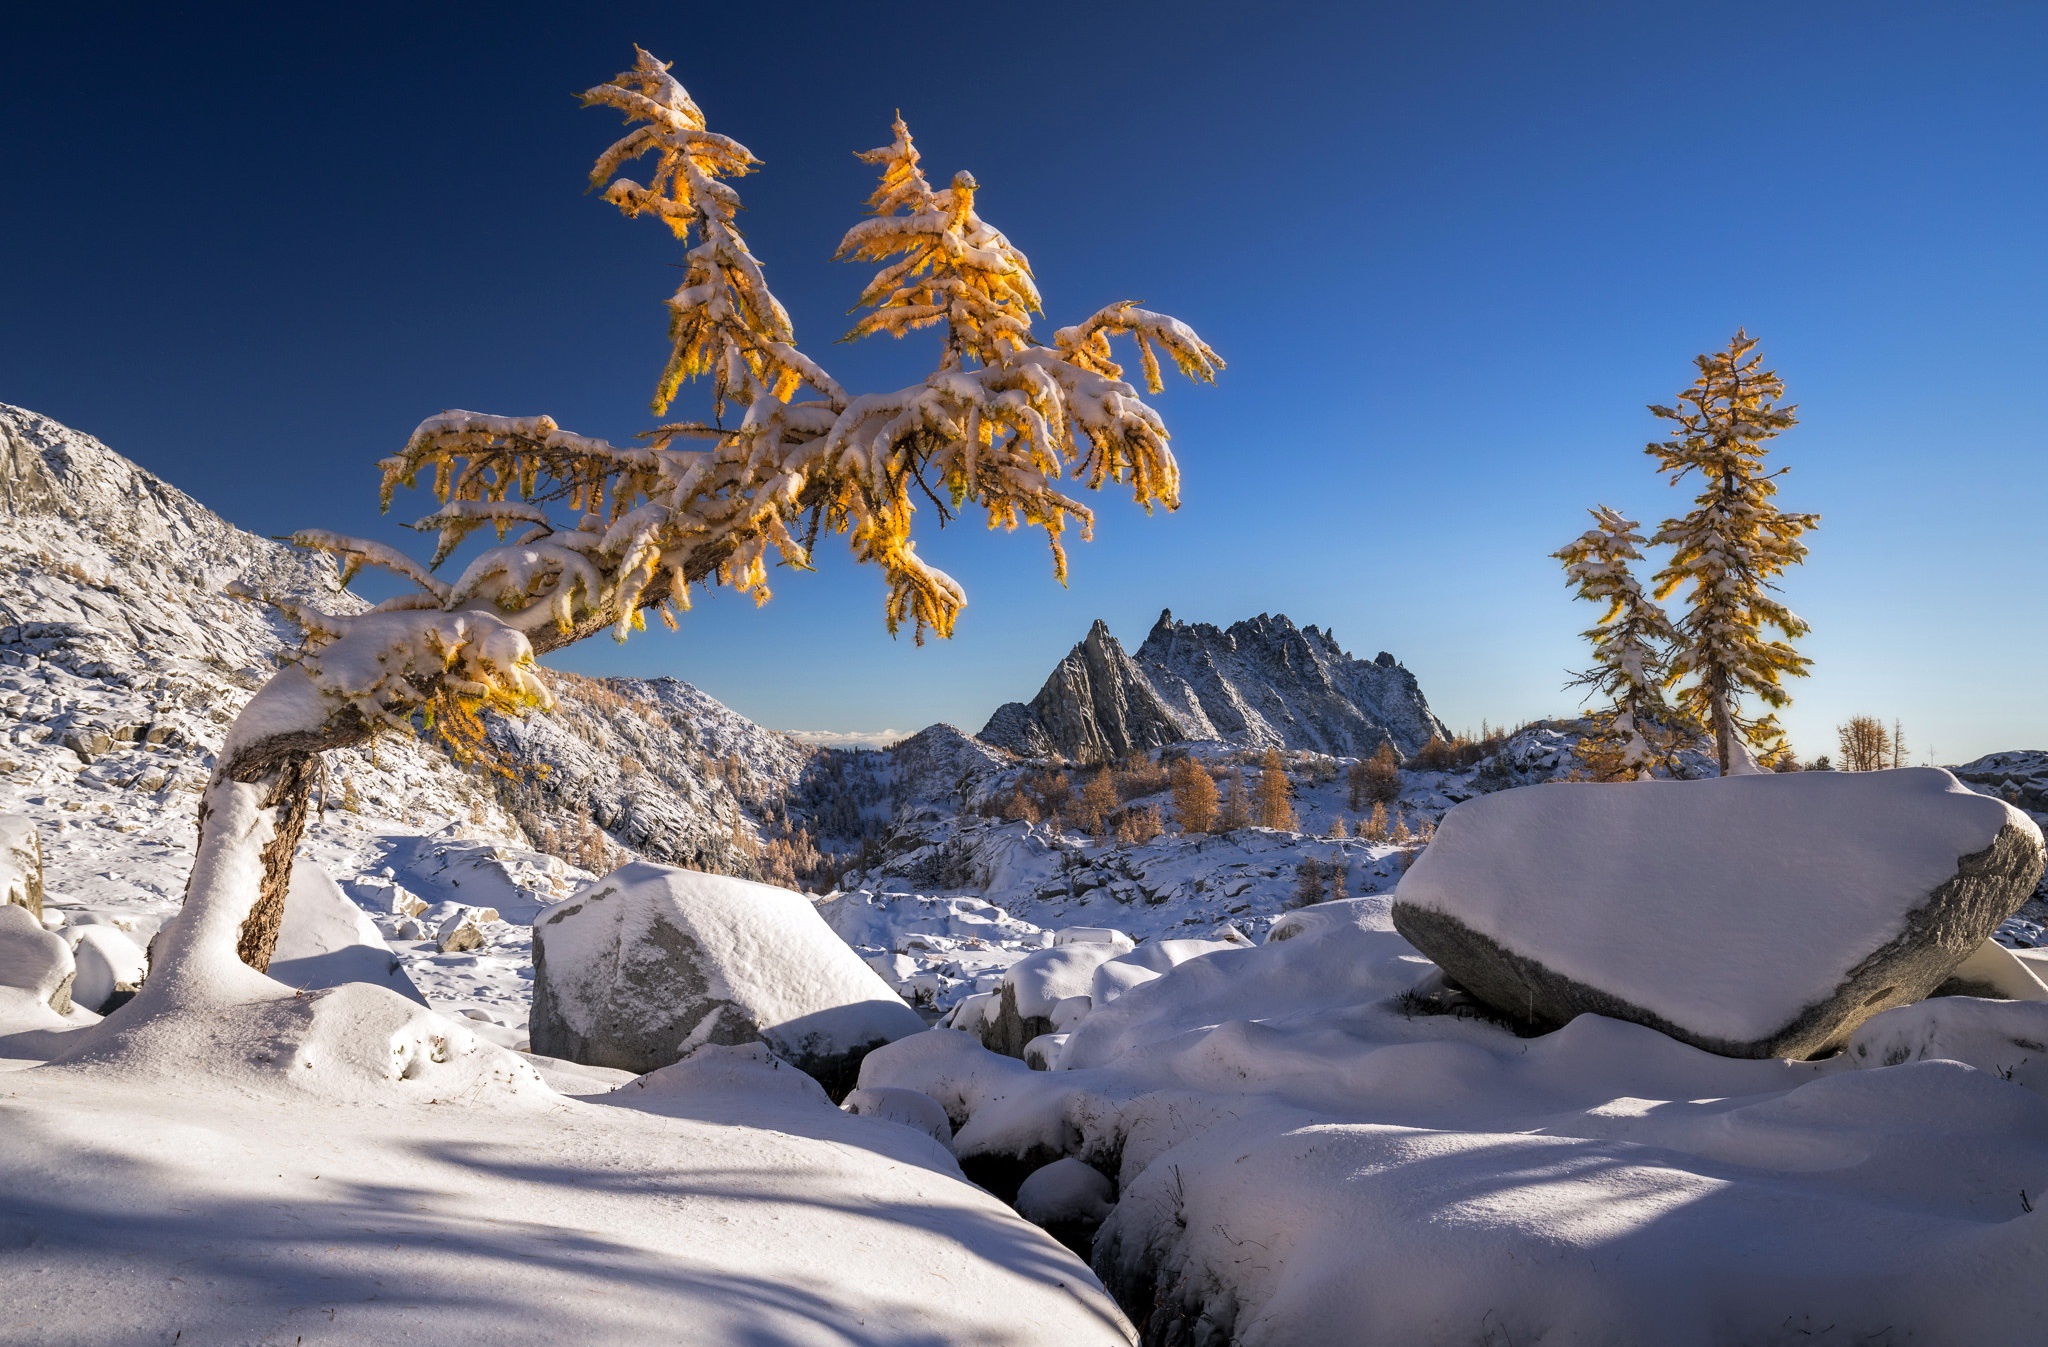 General 2048x1347 nature snow winter landscape mountains clear sky sunlight